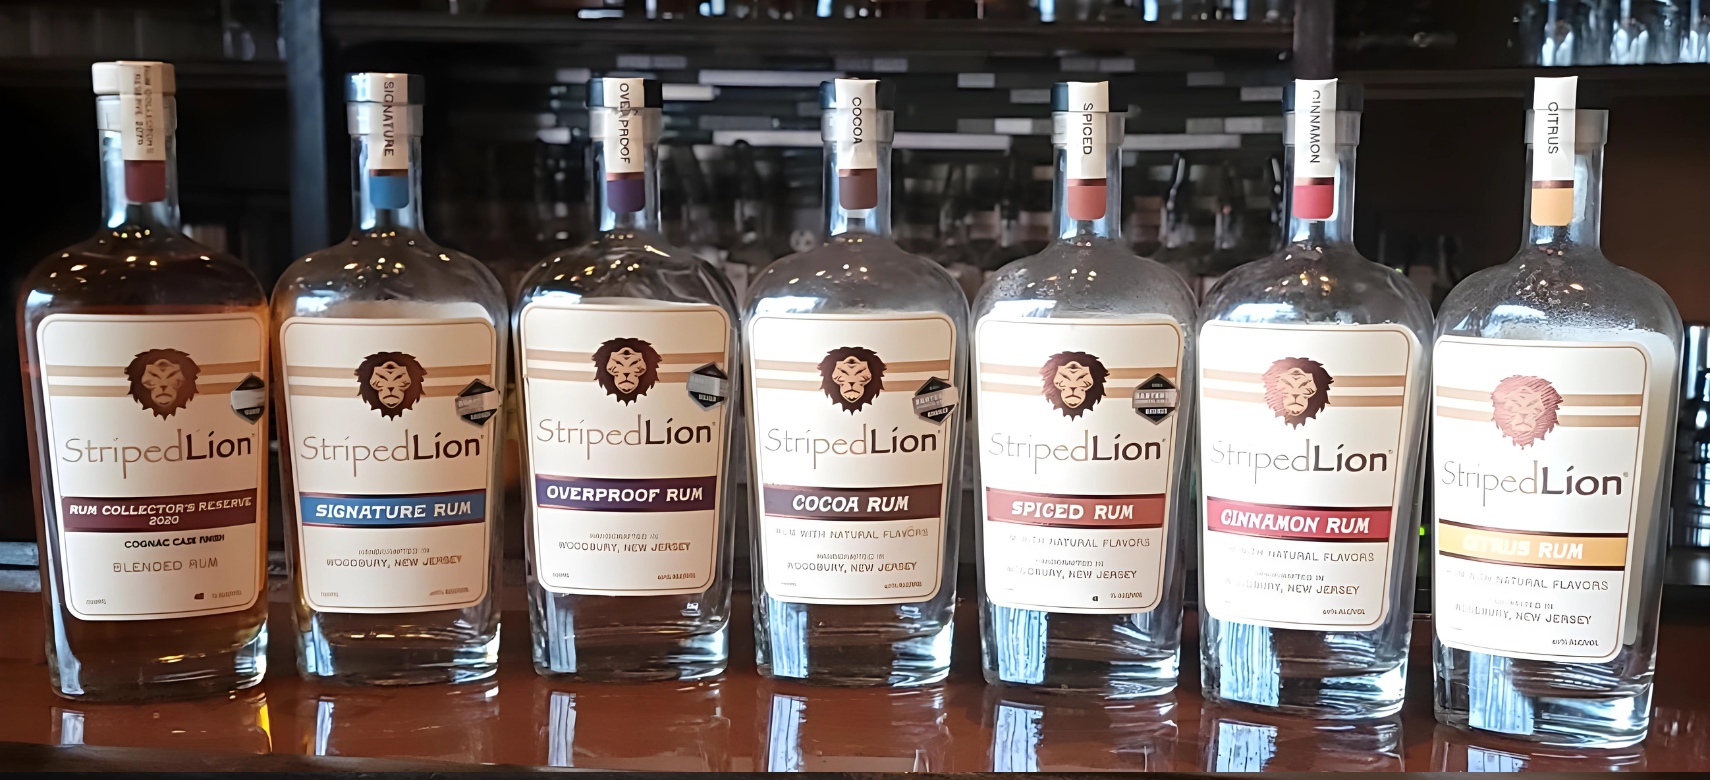 Photo for: Striped Lion's Distilling Success At The Bartender Spirits Awards 